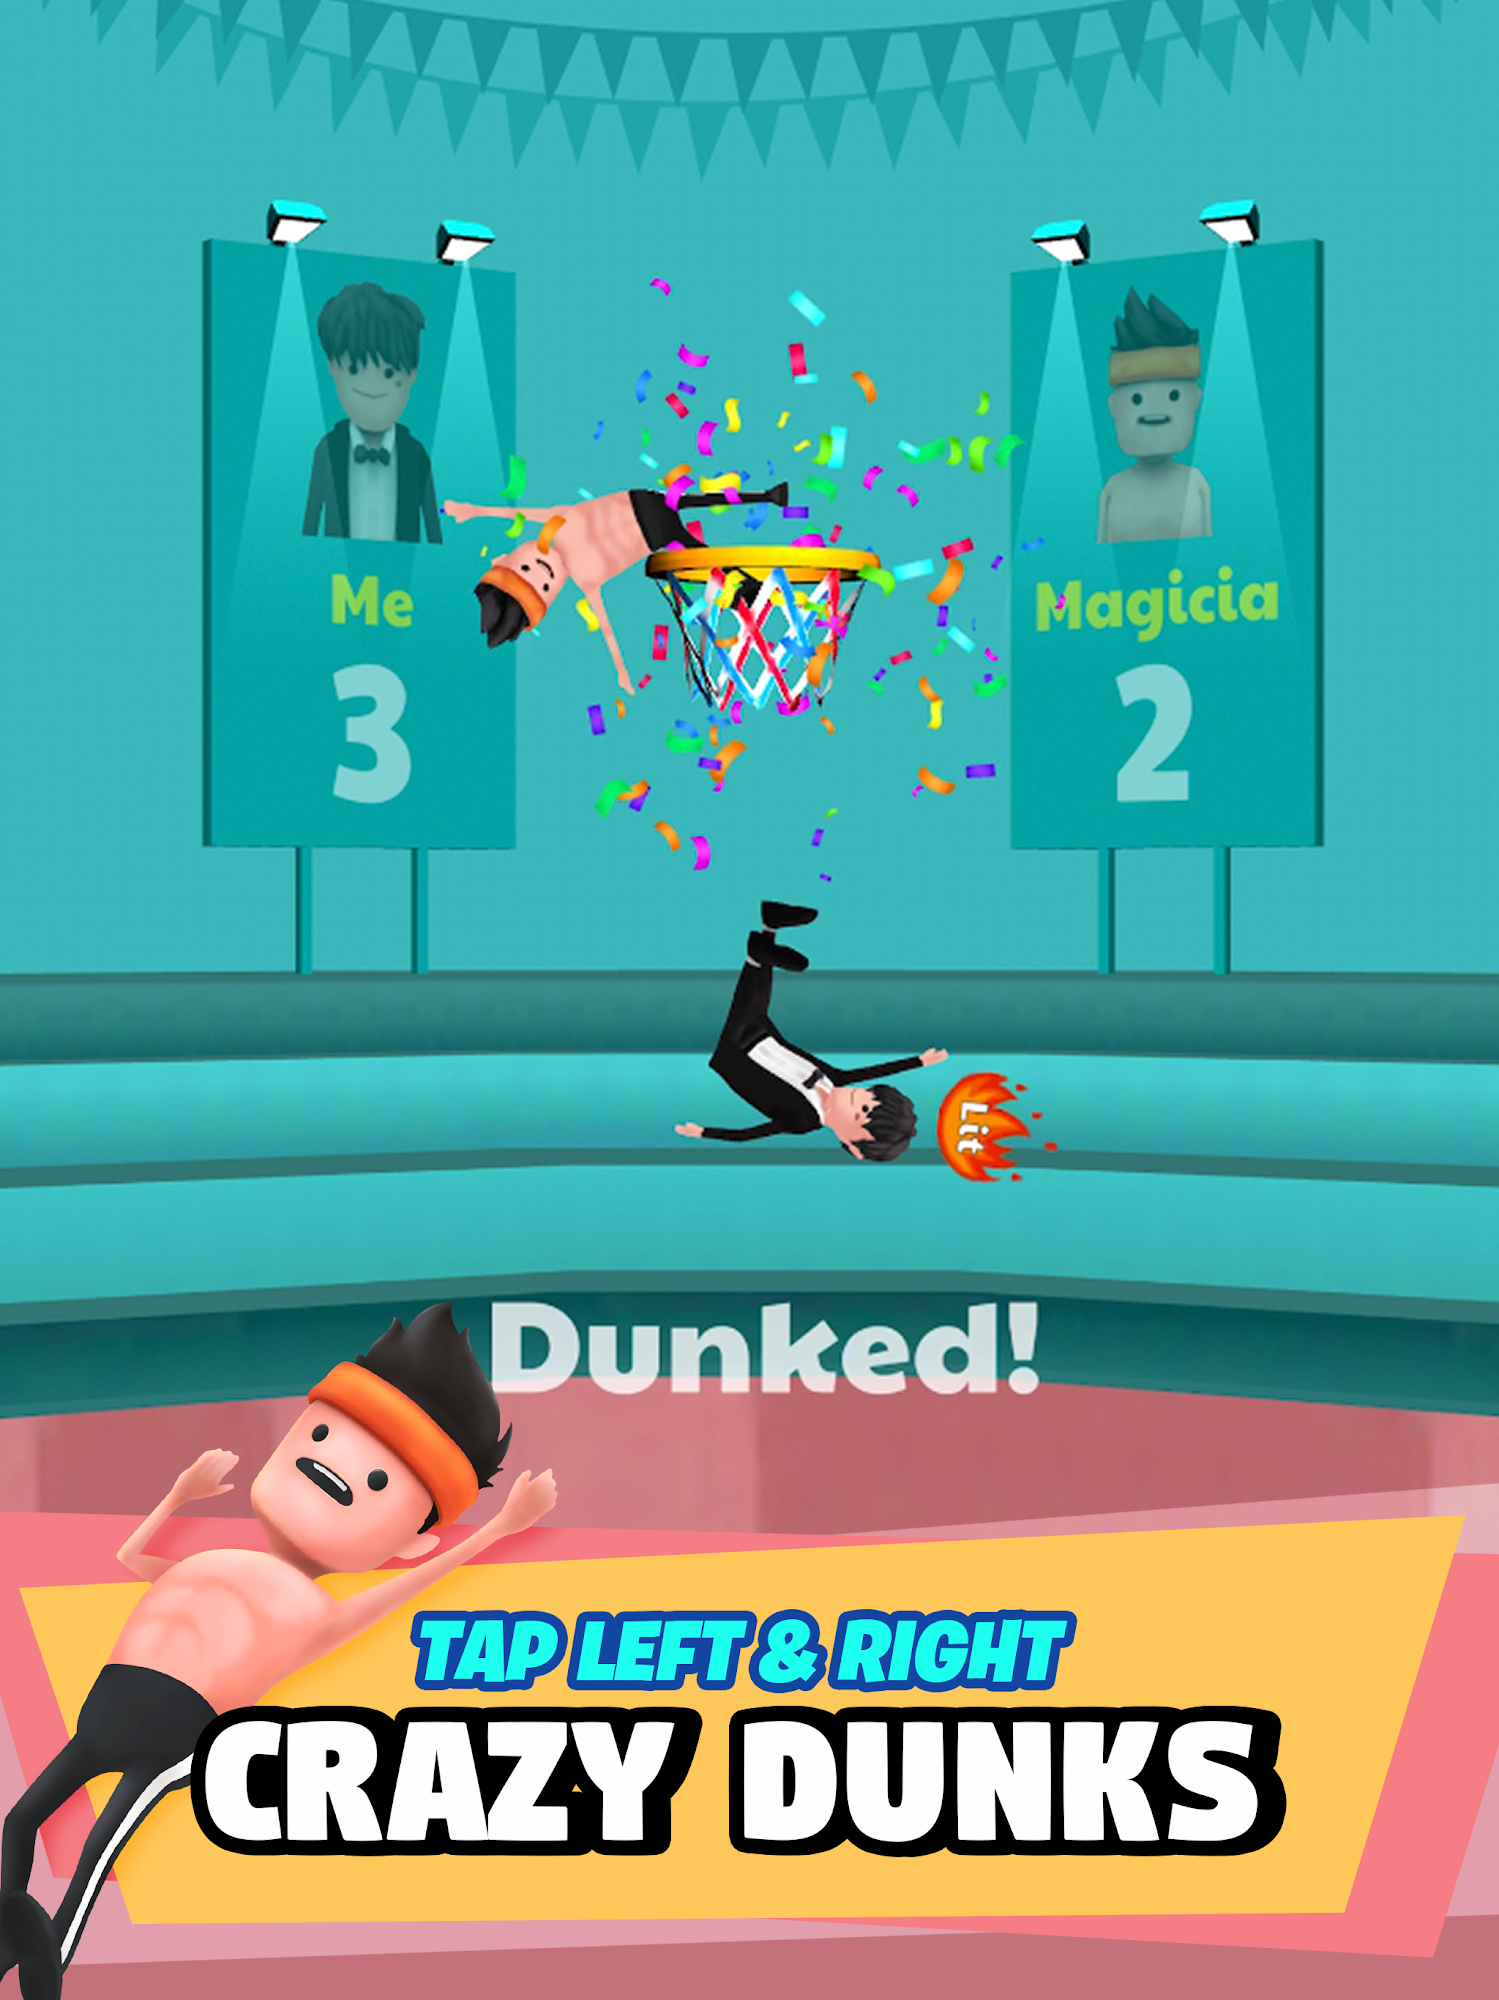 Dobre Dunk for Android